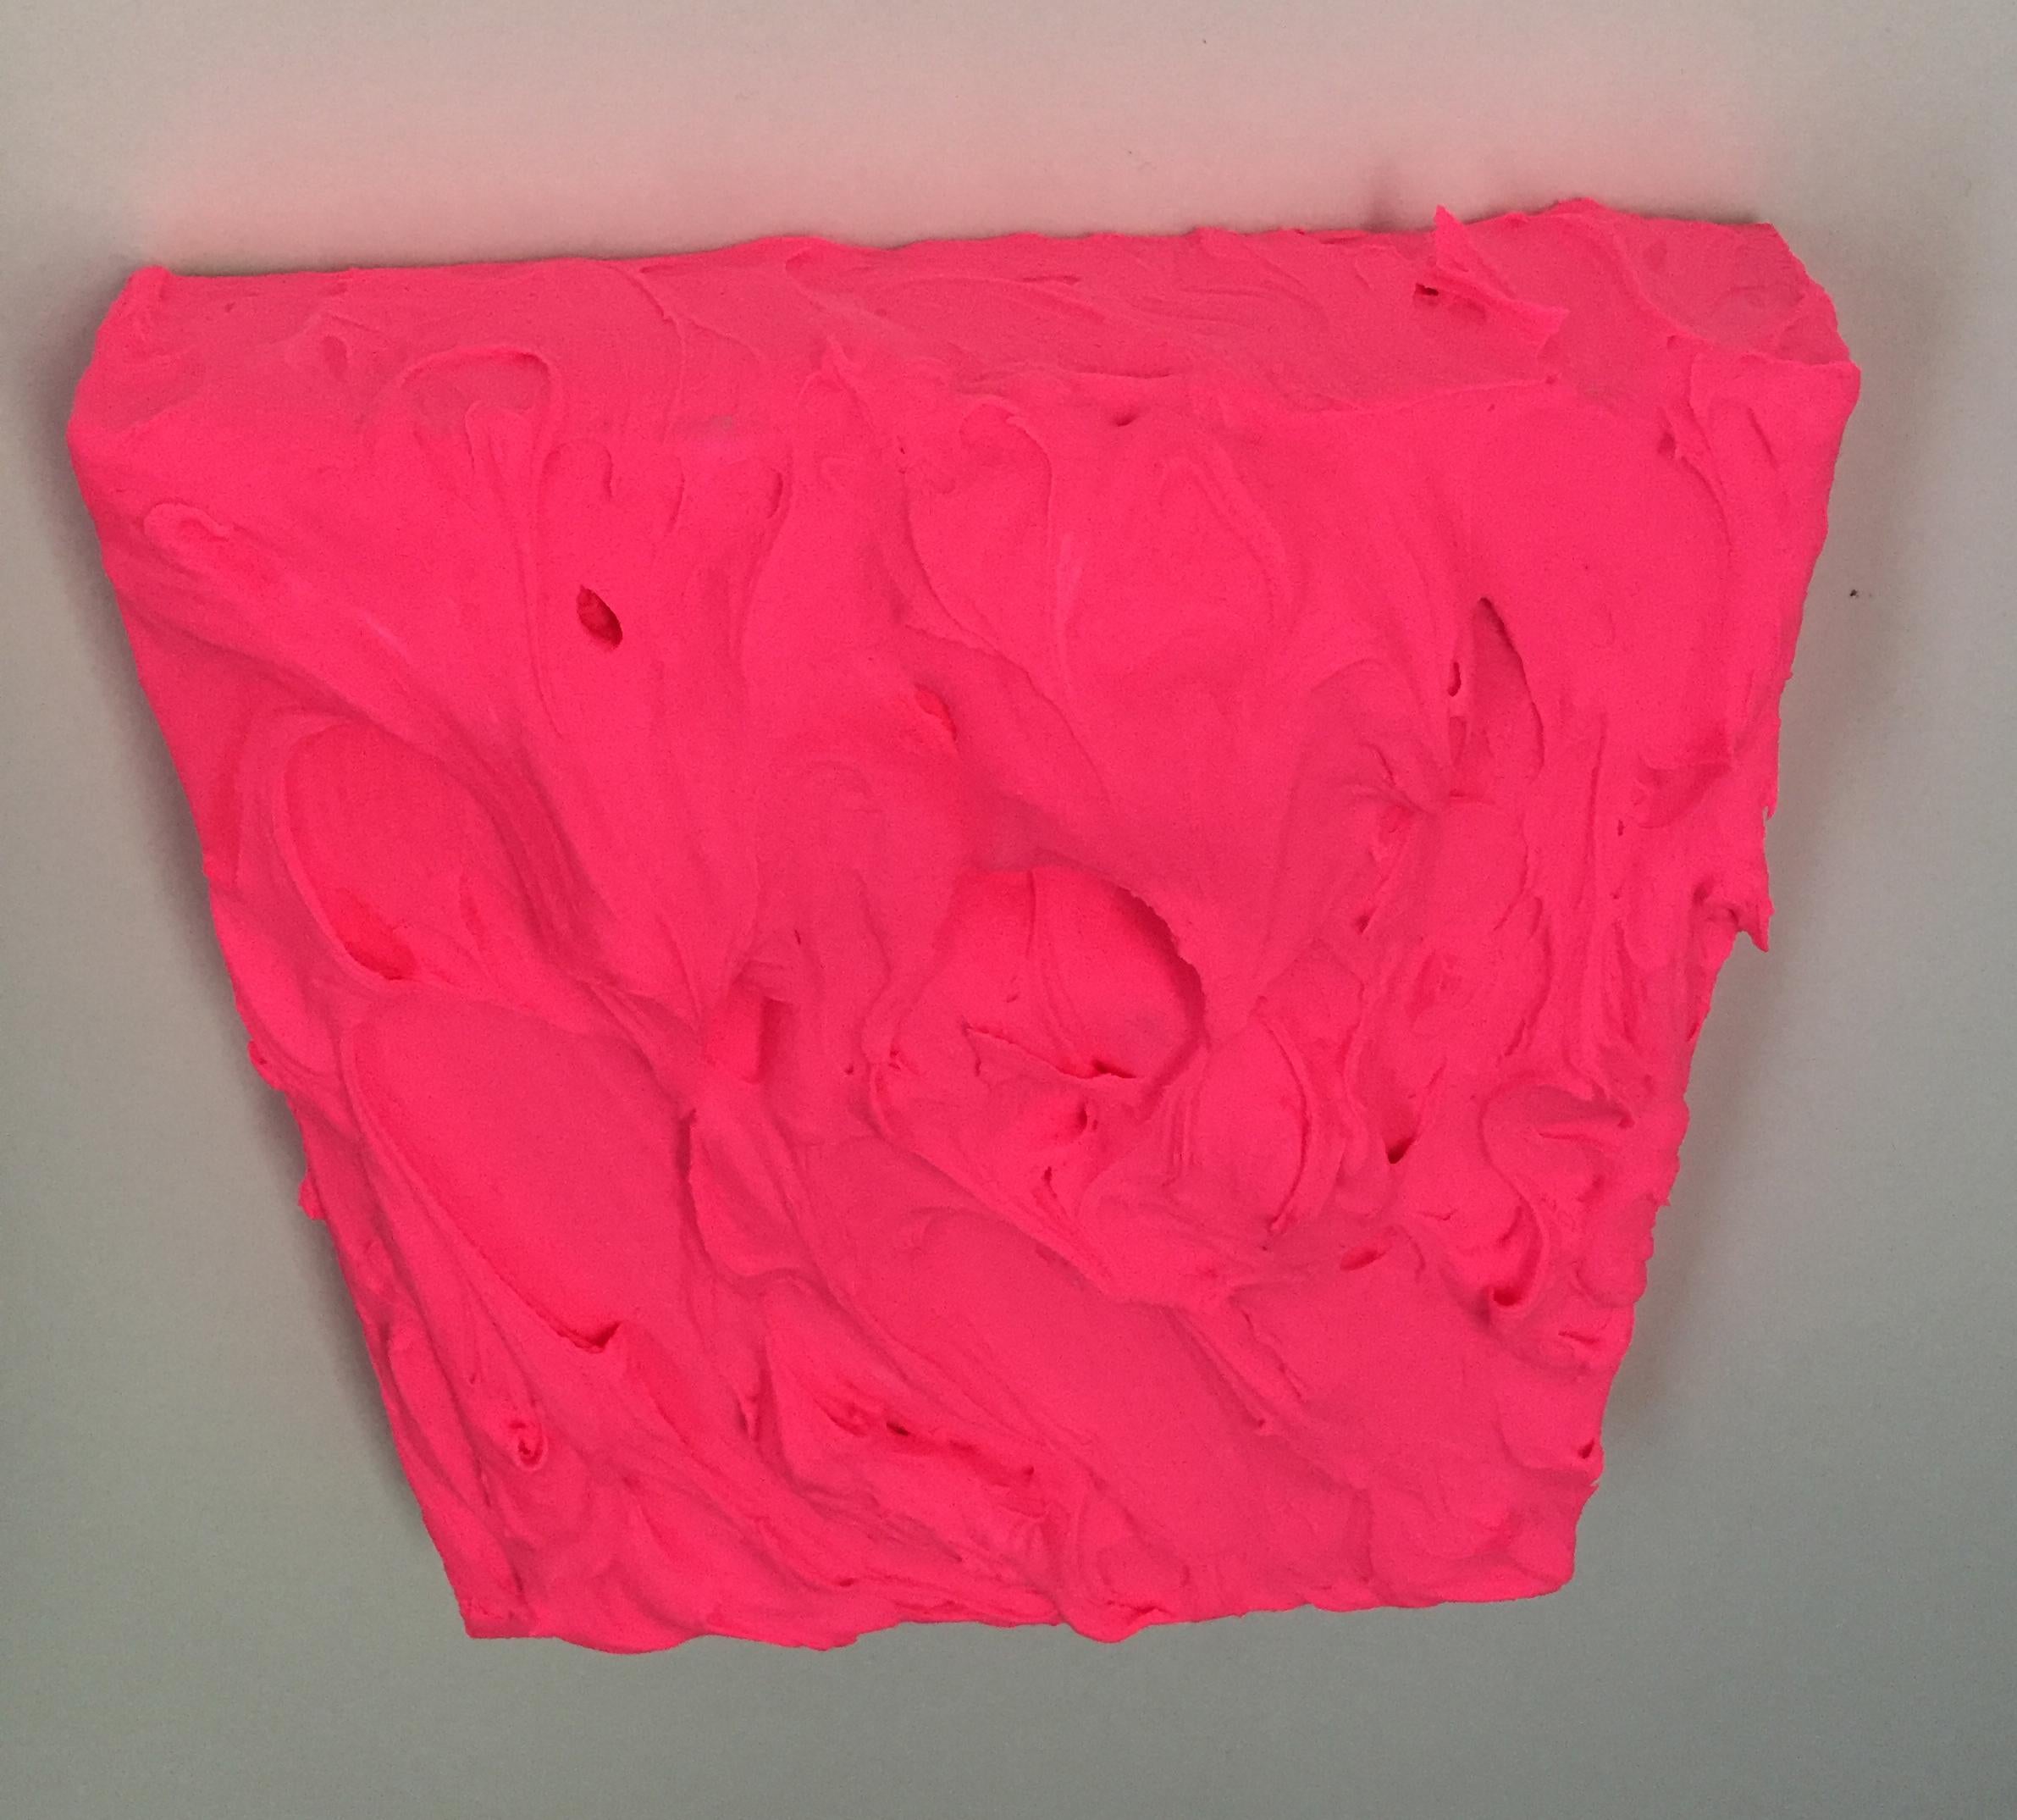 Electric Pink (texture thick painting impasto monochrome pop bold design) - Sculpture by Chloe Hedden